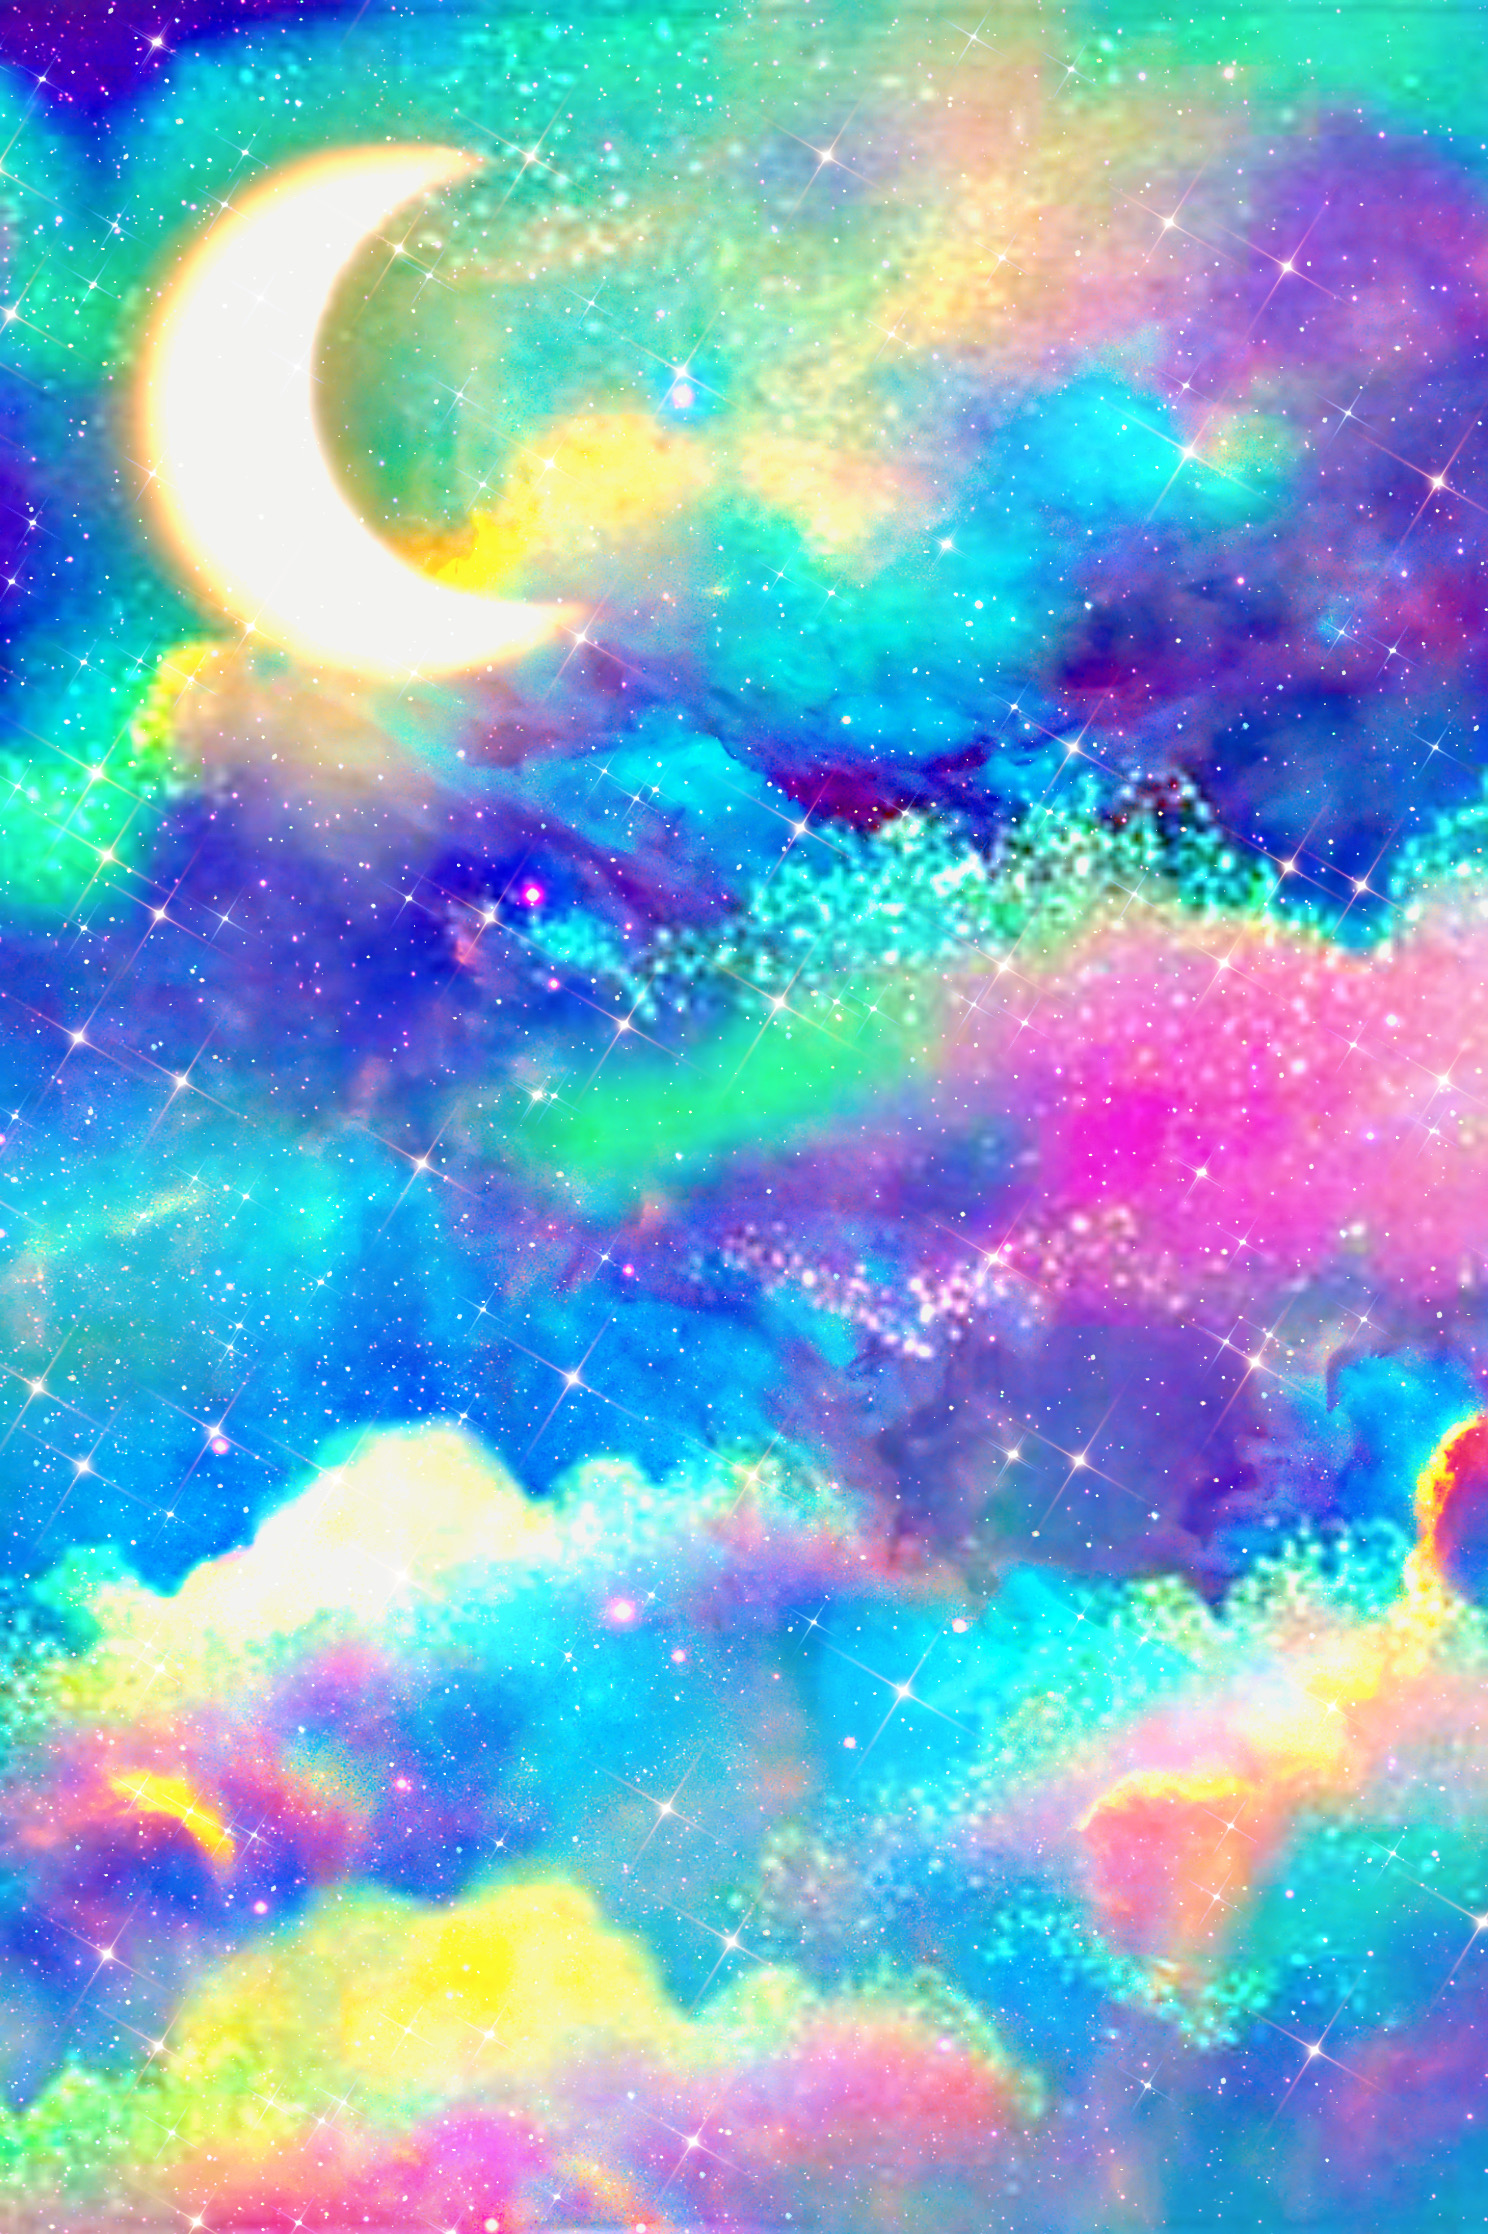 freetoedit glitter sparkles galaxy sky image by @misspink88